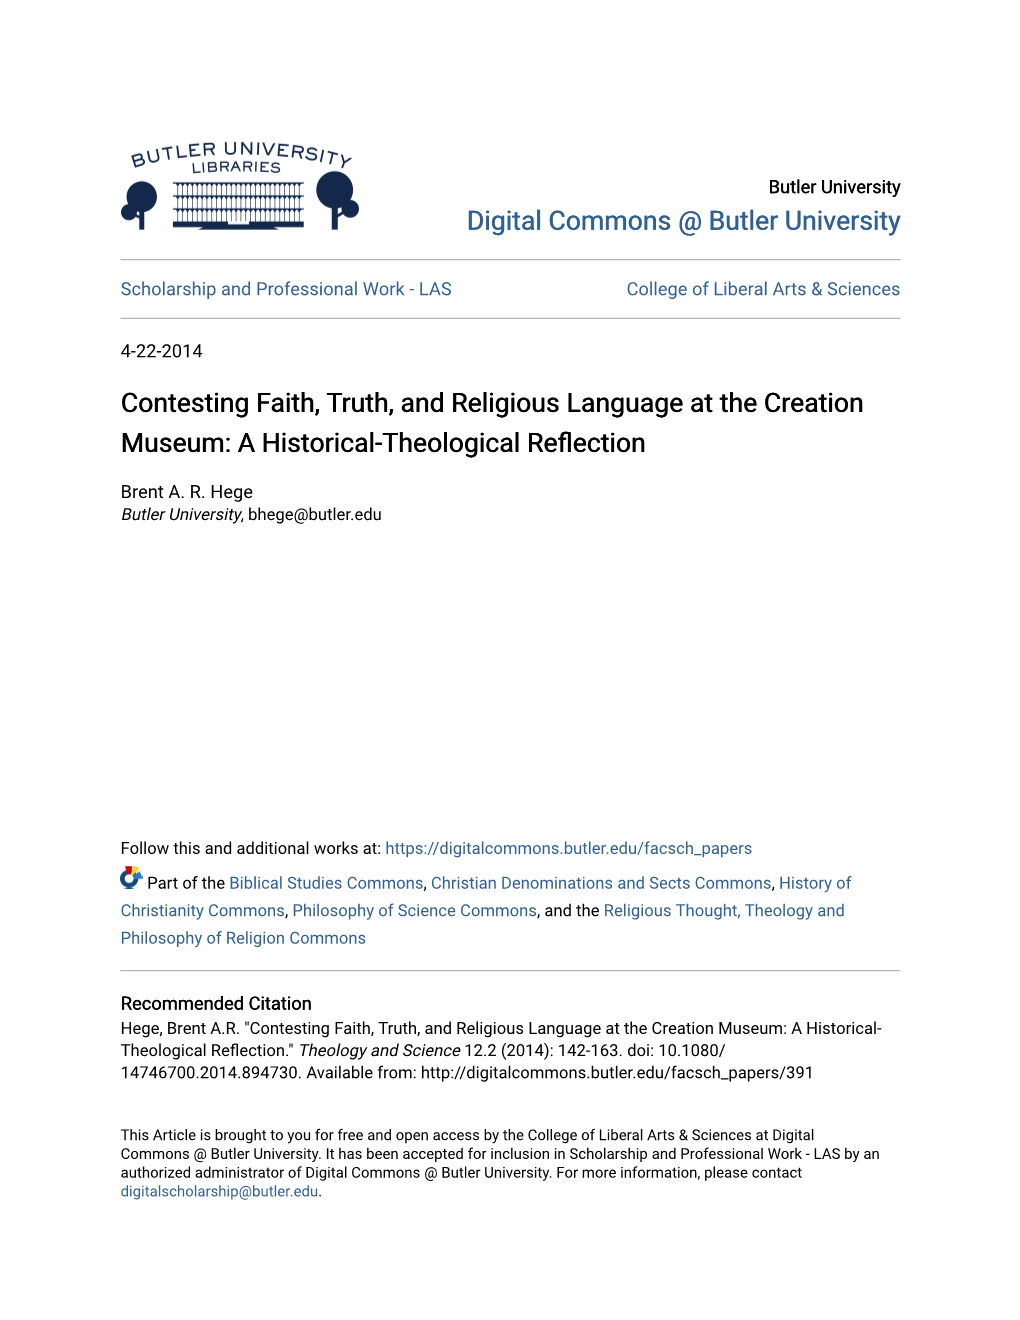 Contesting Faith, Truth, and Religious Language at the Creation Museum: a Historical-Theological Reflection